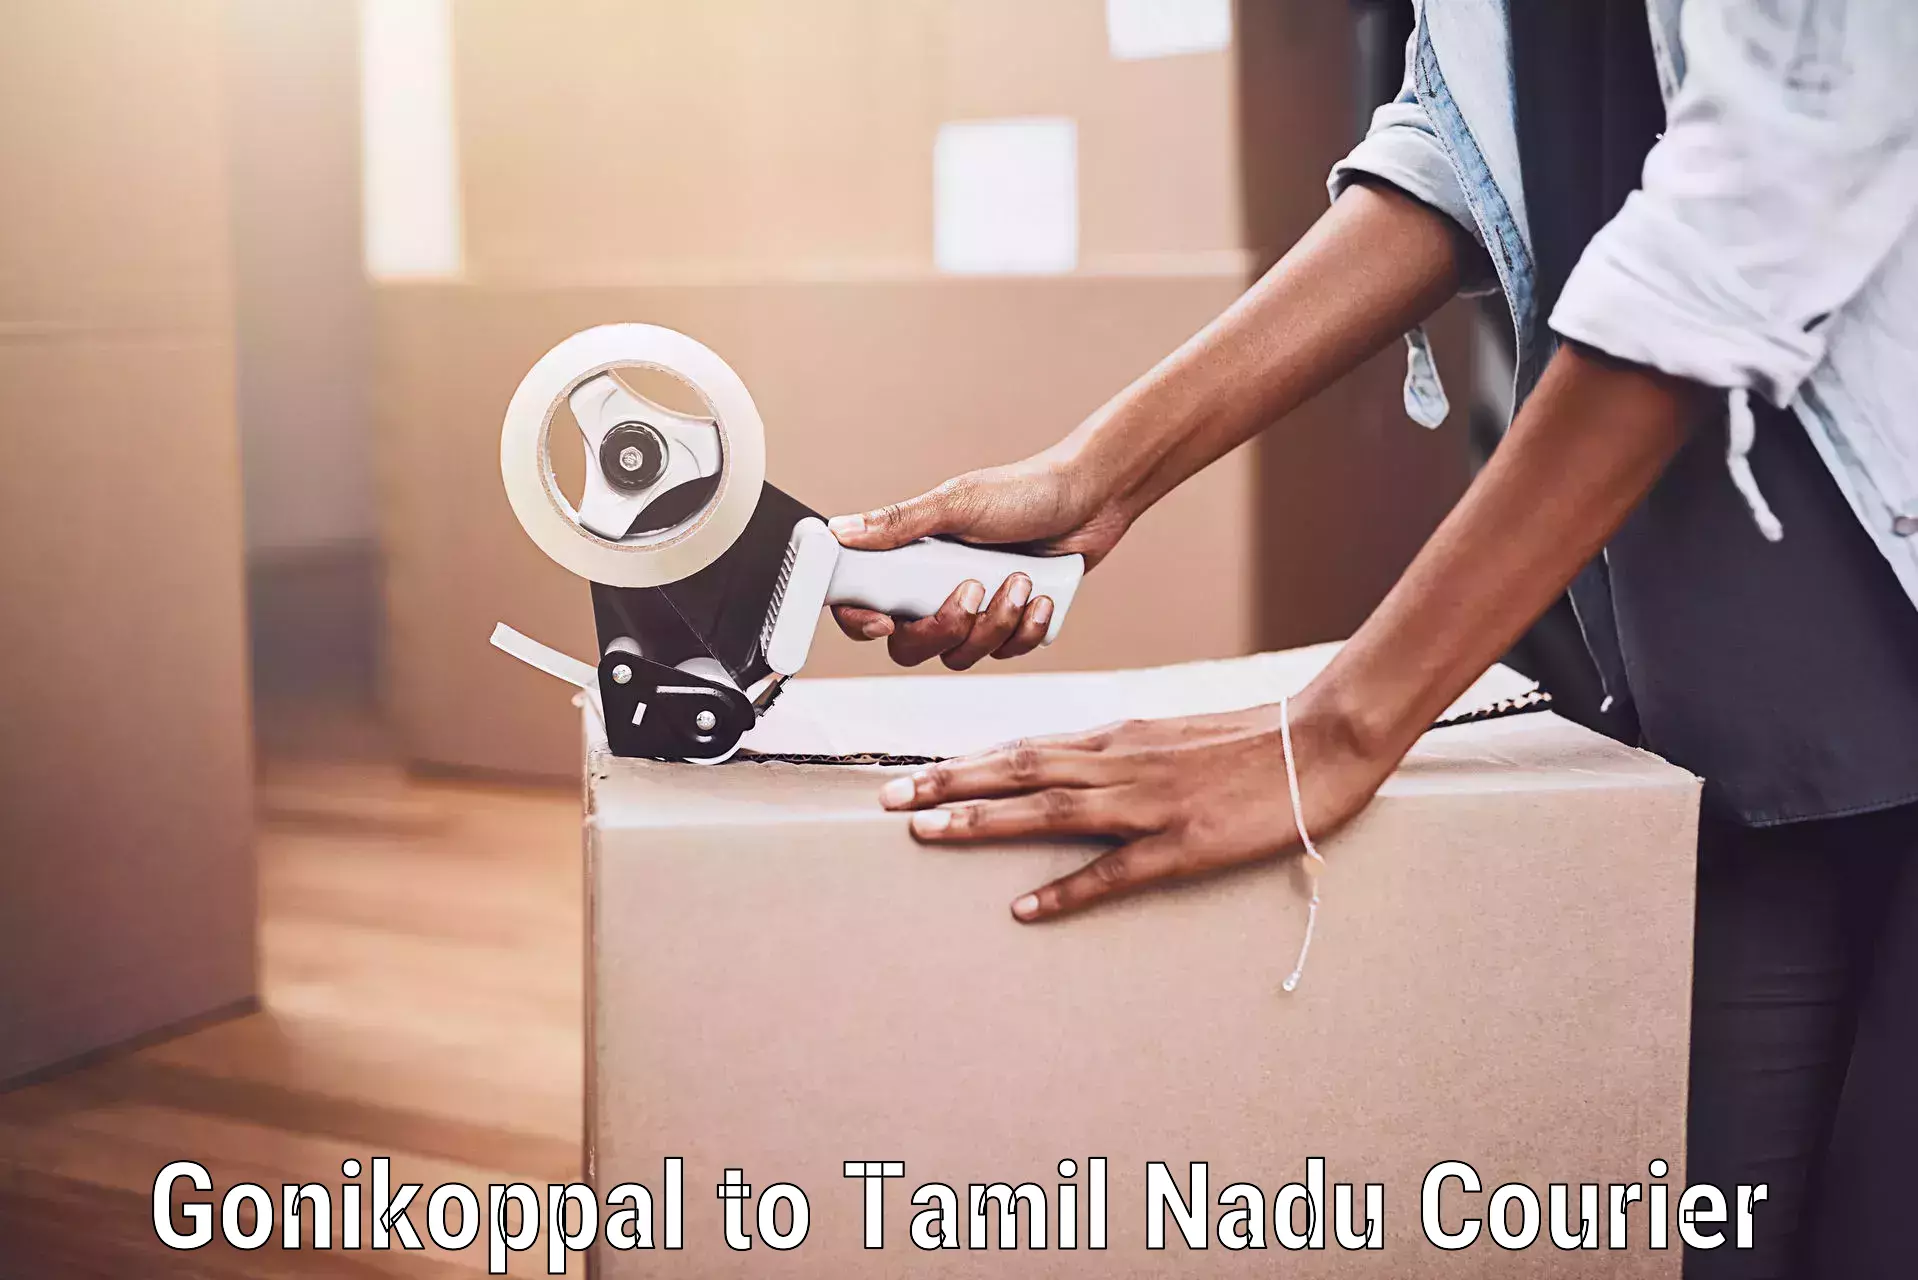 Instant baggage transport quote Gonikoppal to Tamil Nadu